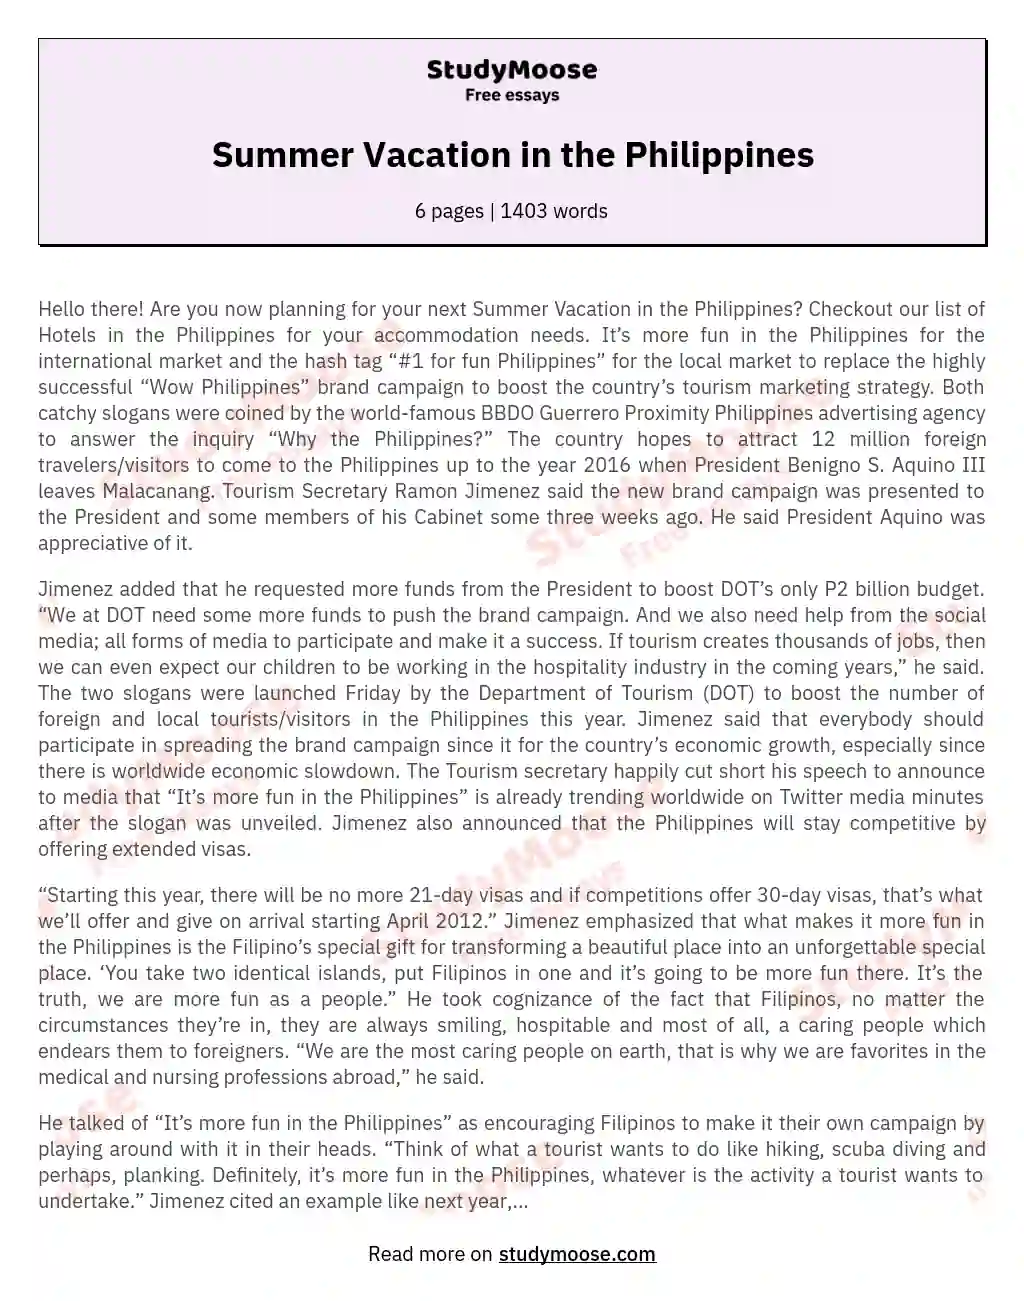 Summer Vacation in the Philippines